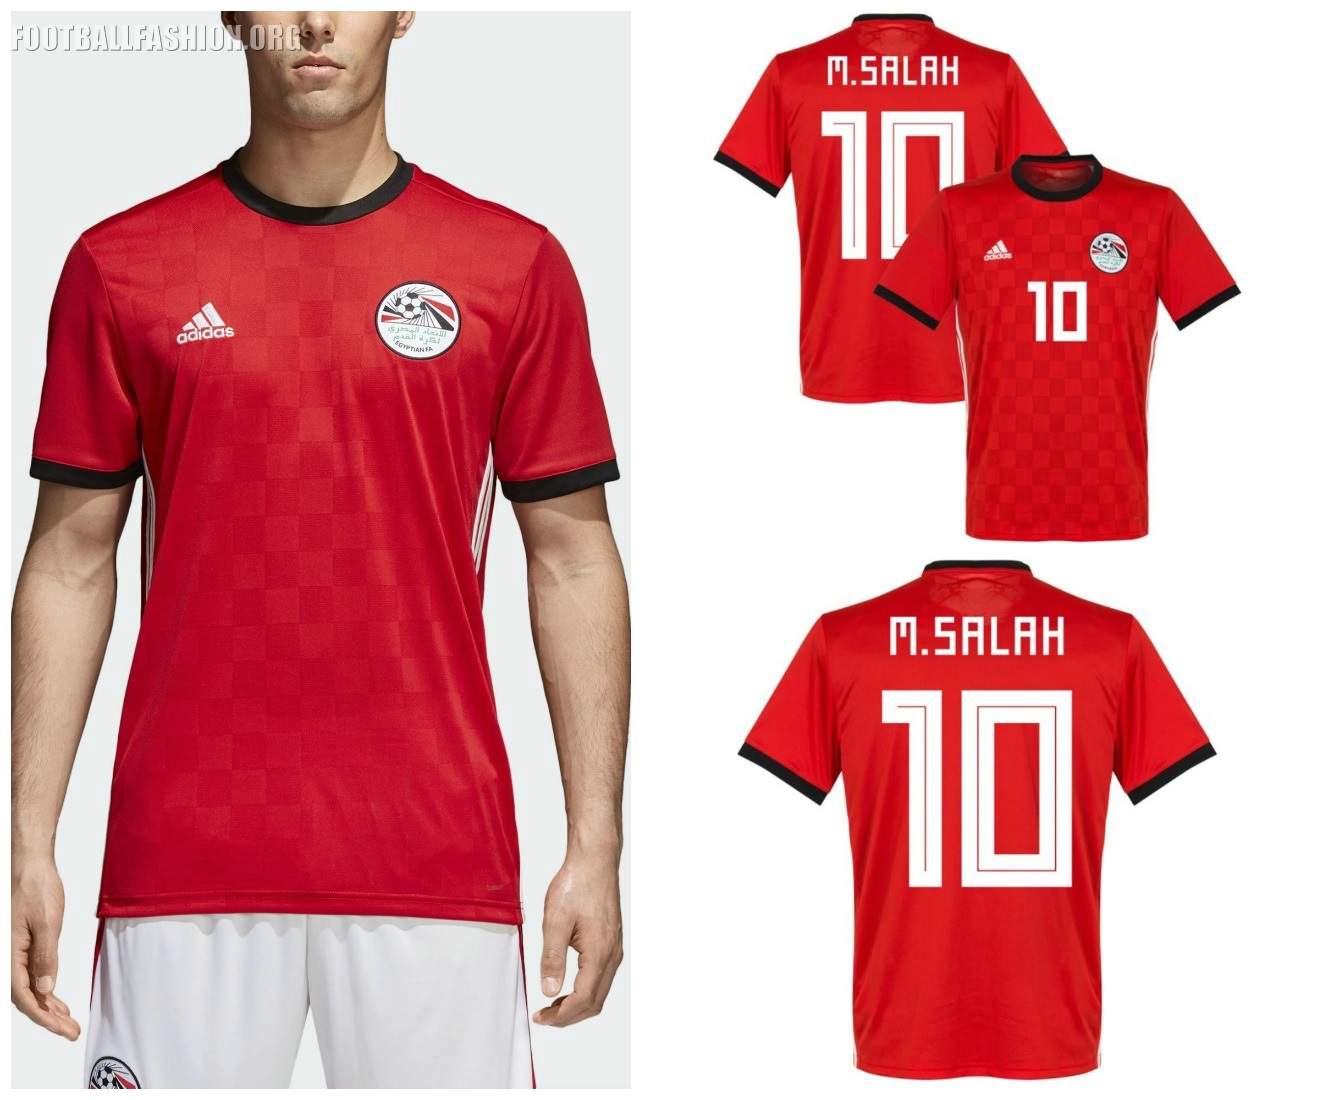 egypt-2018-world-cup-red-adidas-home-kit-2.jpg